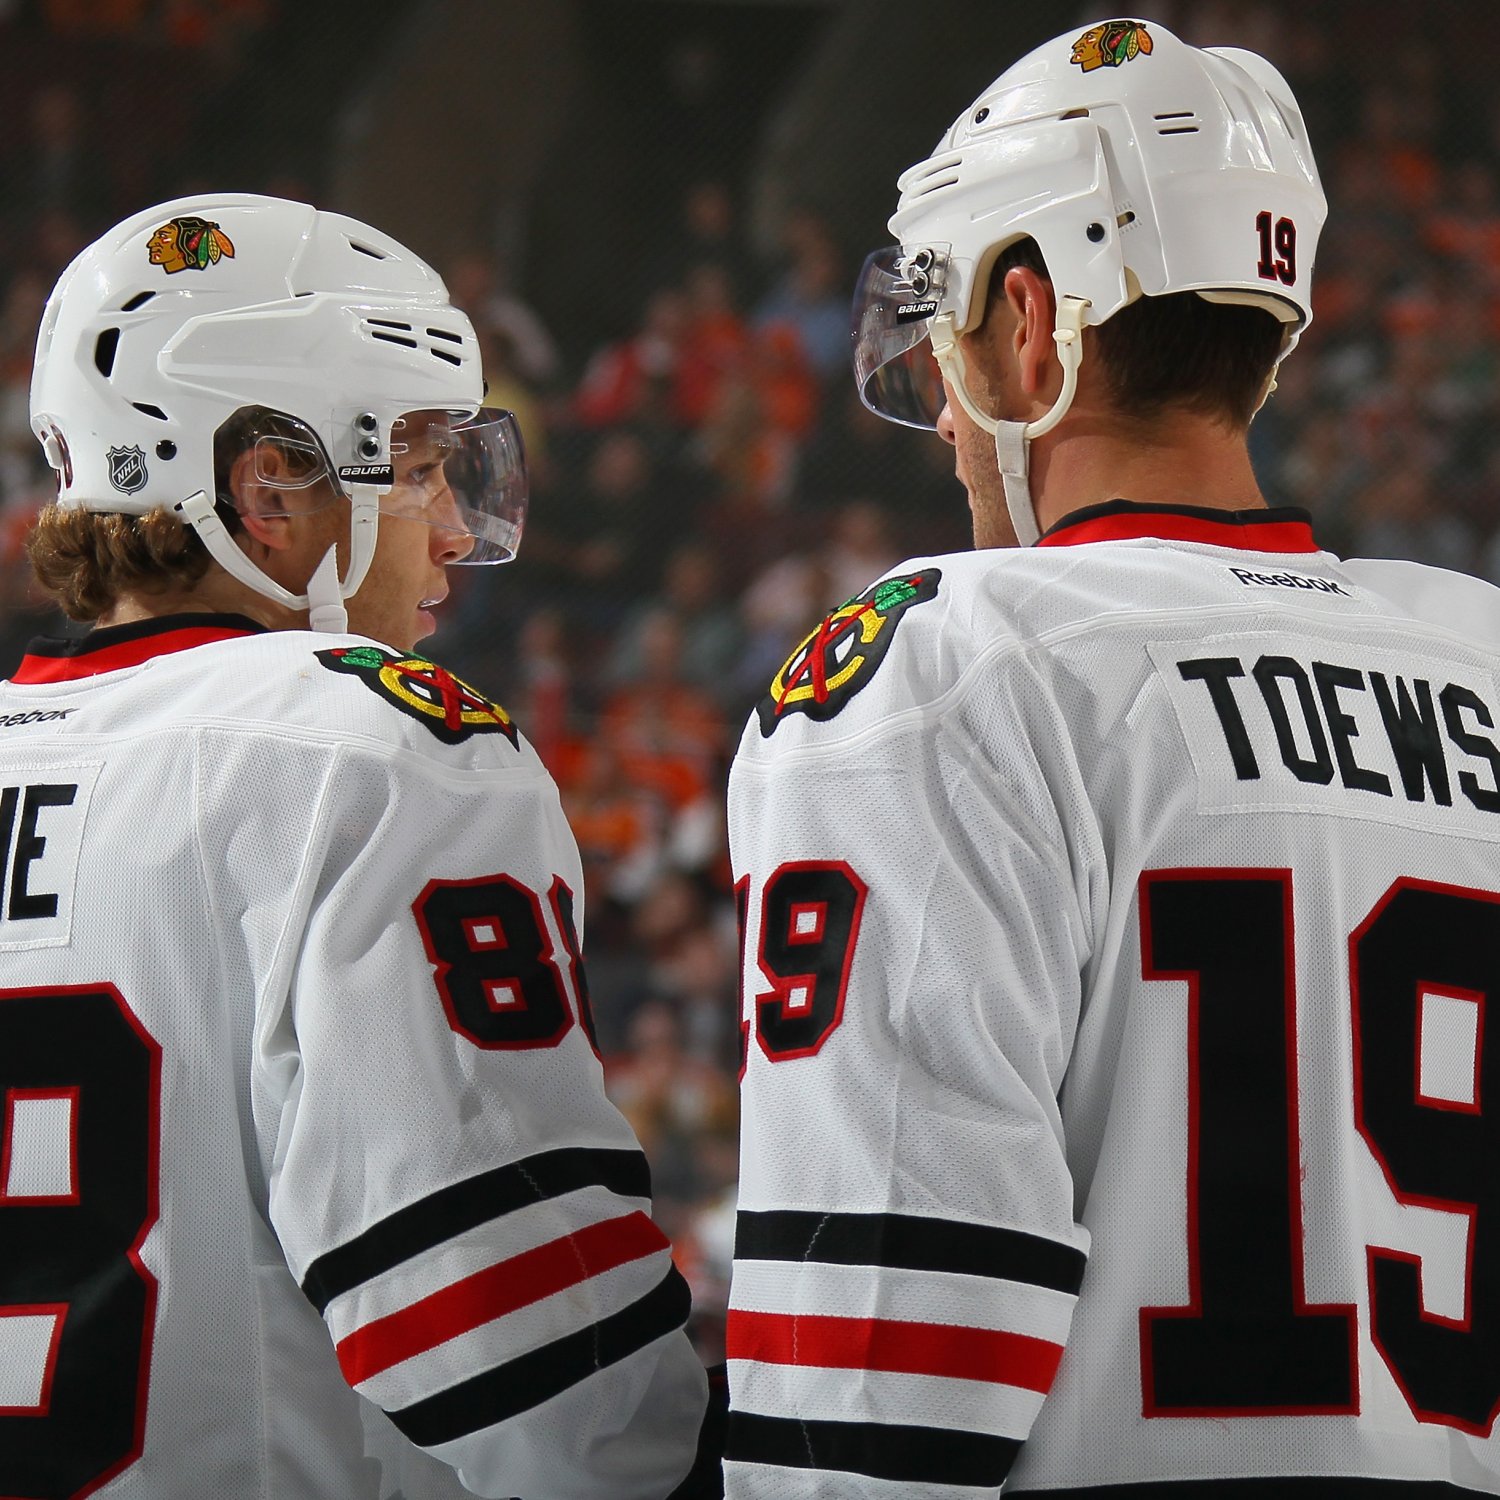 Have Depth Issues Closed the Chicago Blackhawks' Stanley Cup Window?